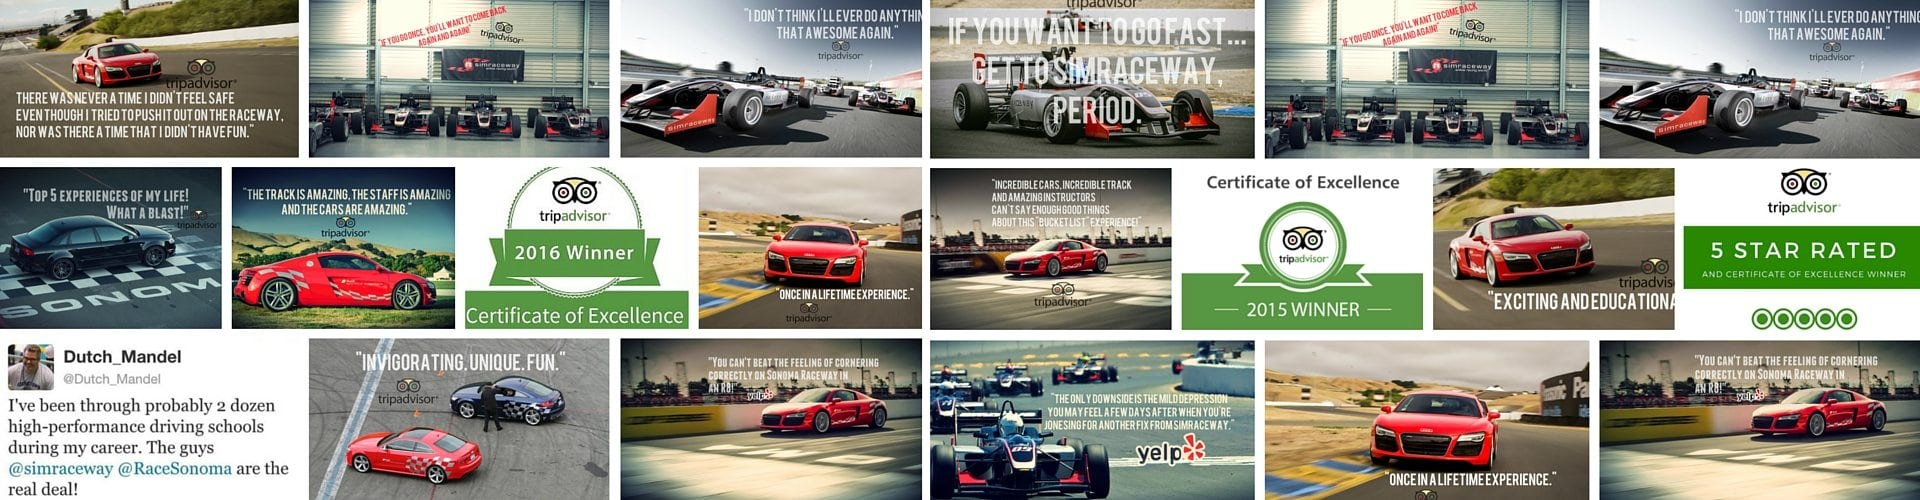 Gift Card Birthday Ideas Simraceway Experience Gifts Driving Racing Birthday Mens Gift Cards